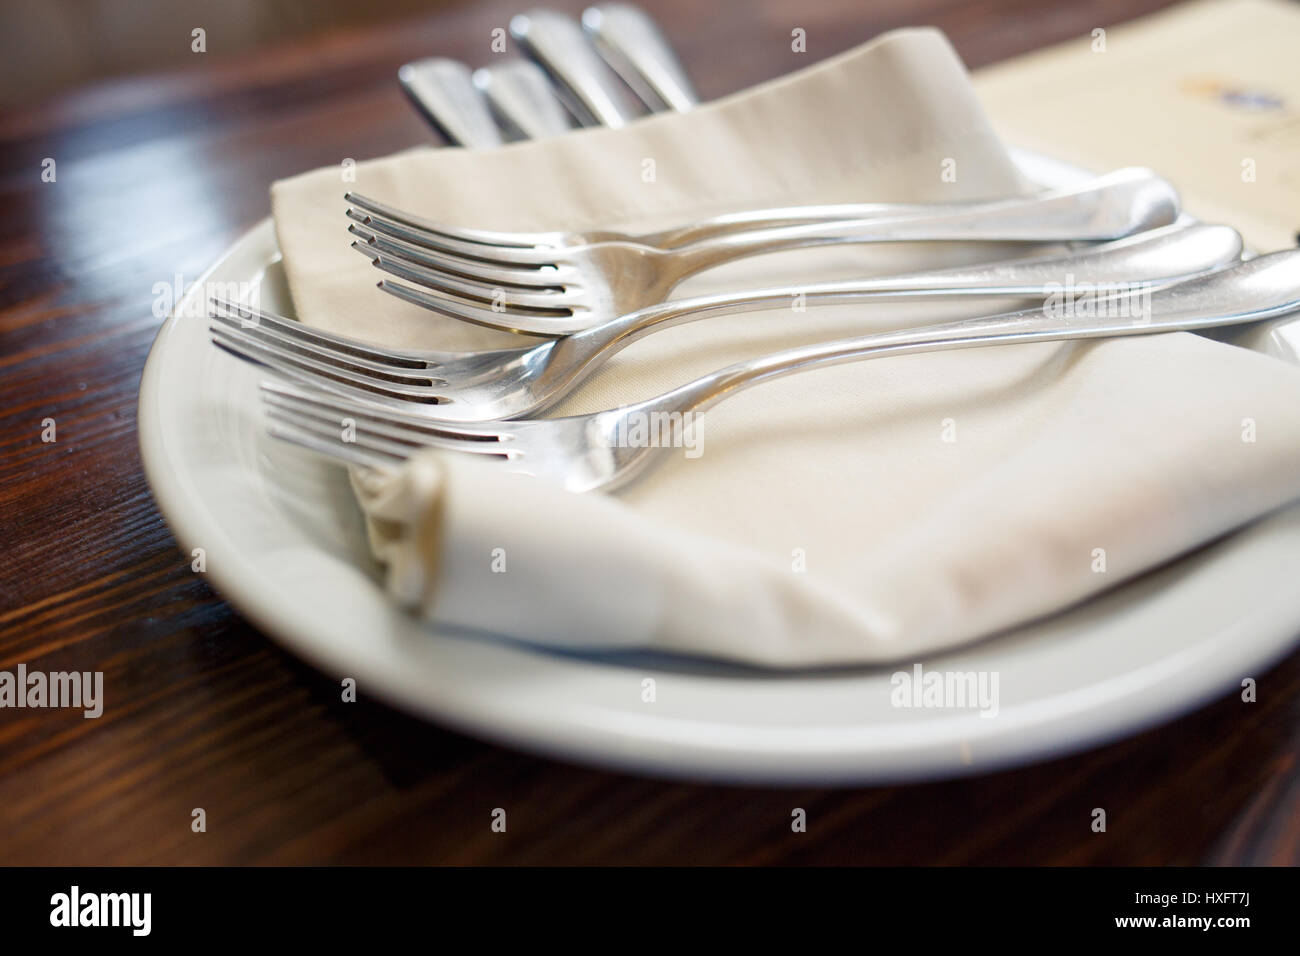 Close up image of forks and knives served on the table in restaurant. Cutlery background Stock Photo